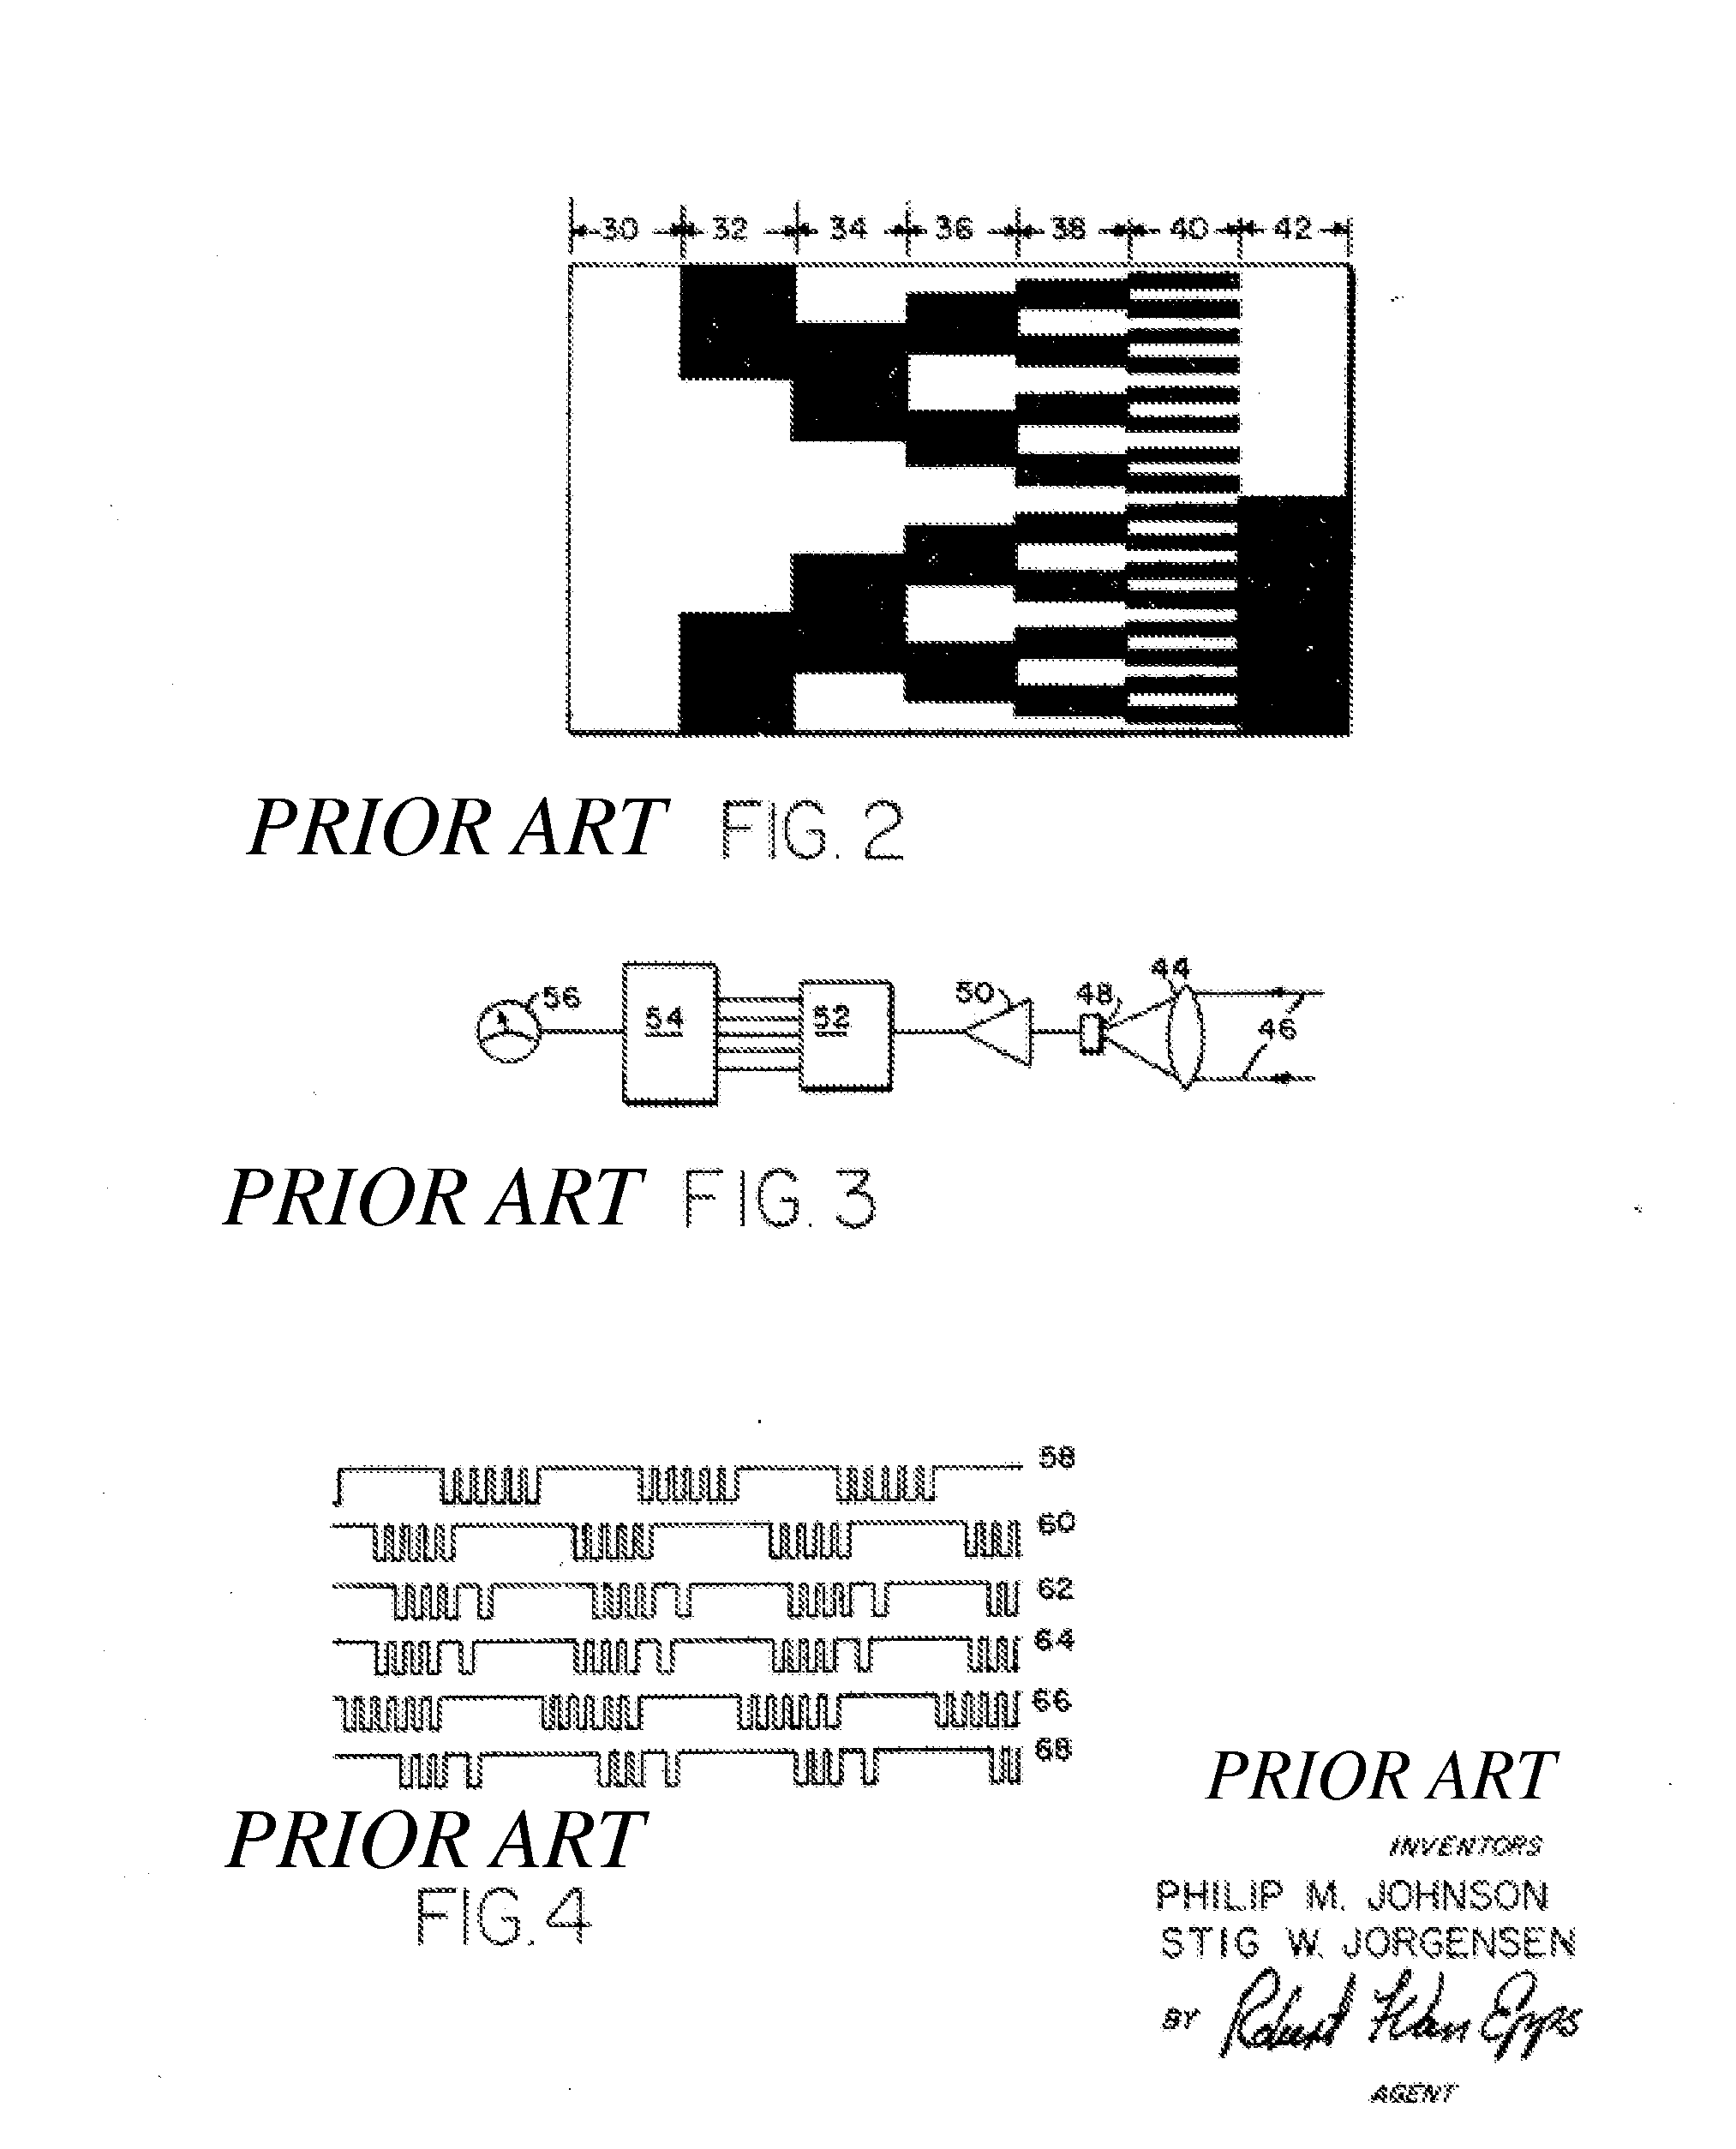 Compound structured light projection system for 3-D surface profiling